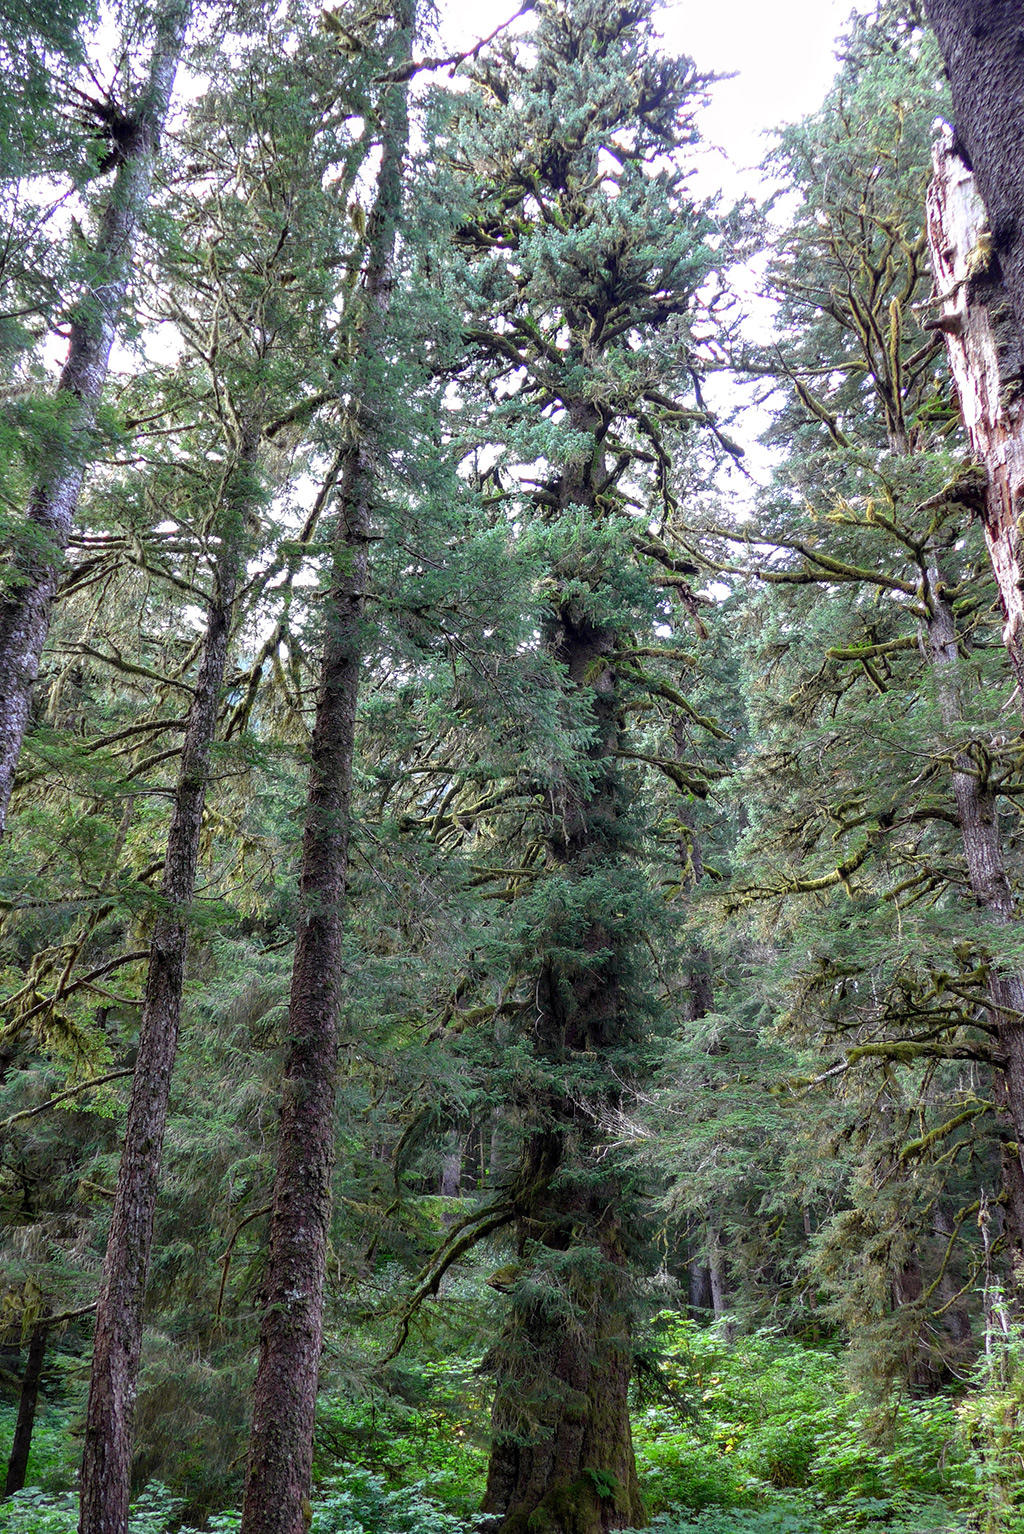 The massive spruce dwarfing the “large” old-growth spruce trees around it.